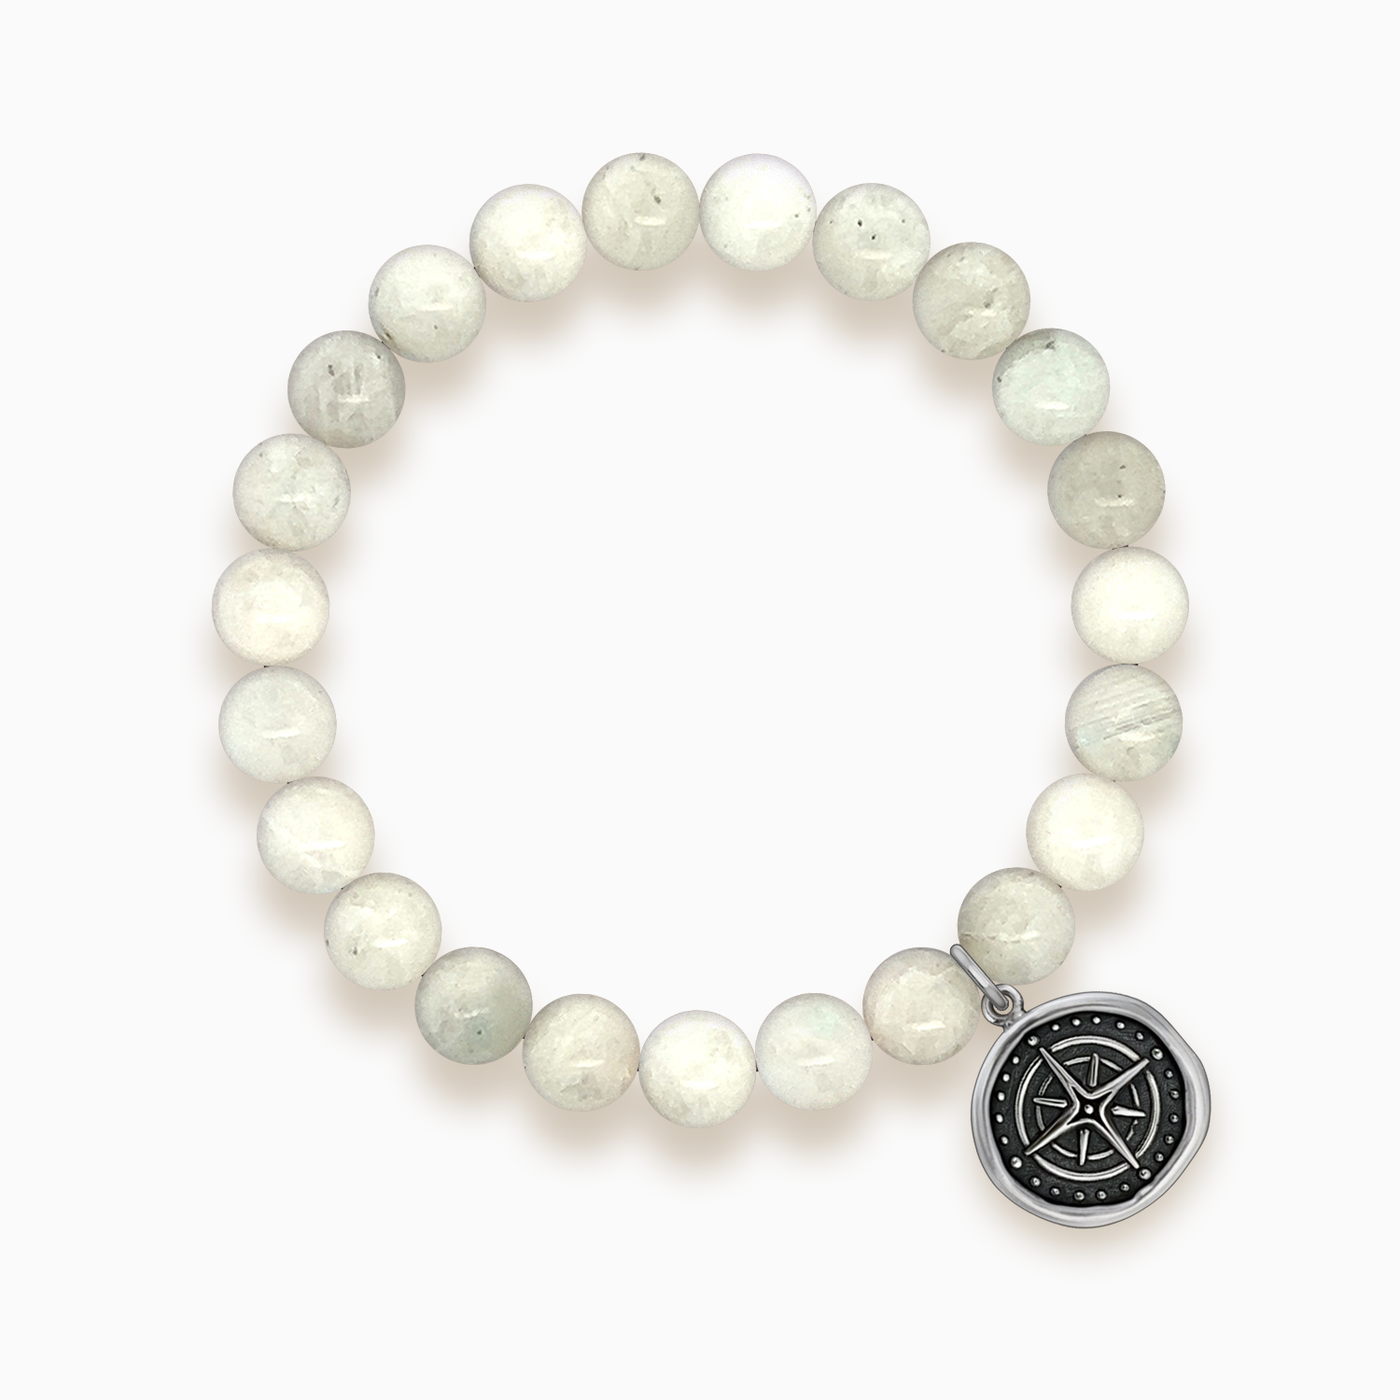 Gemstone Stacker Bracelet With Wax Seal Compass Charm